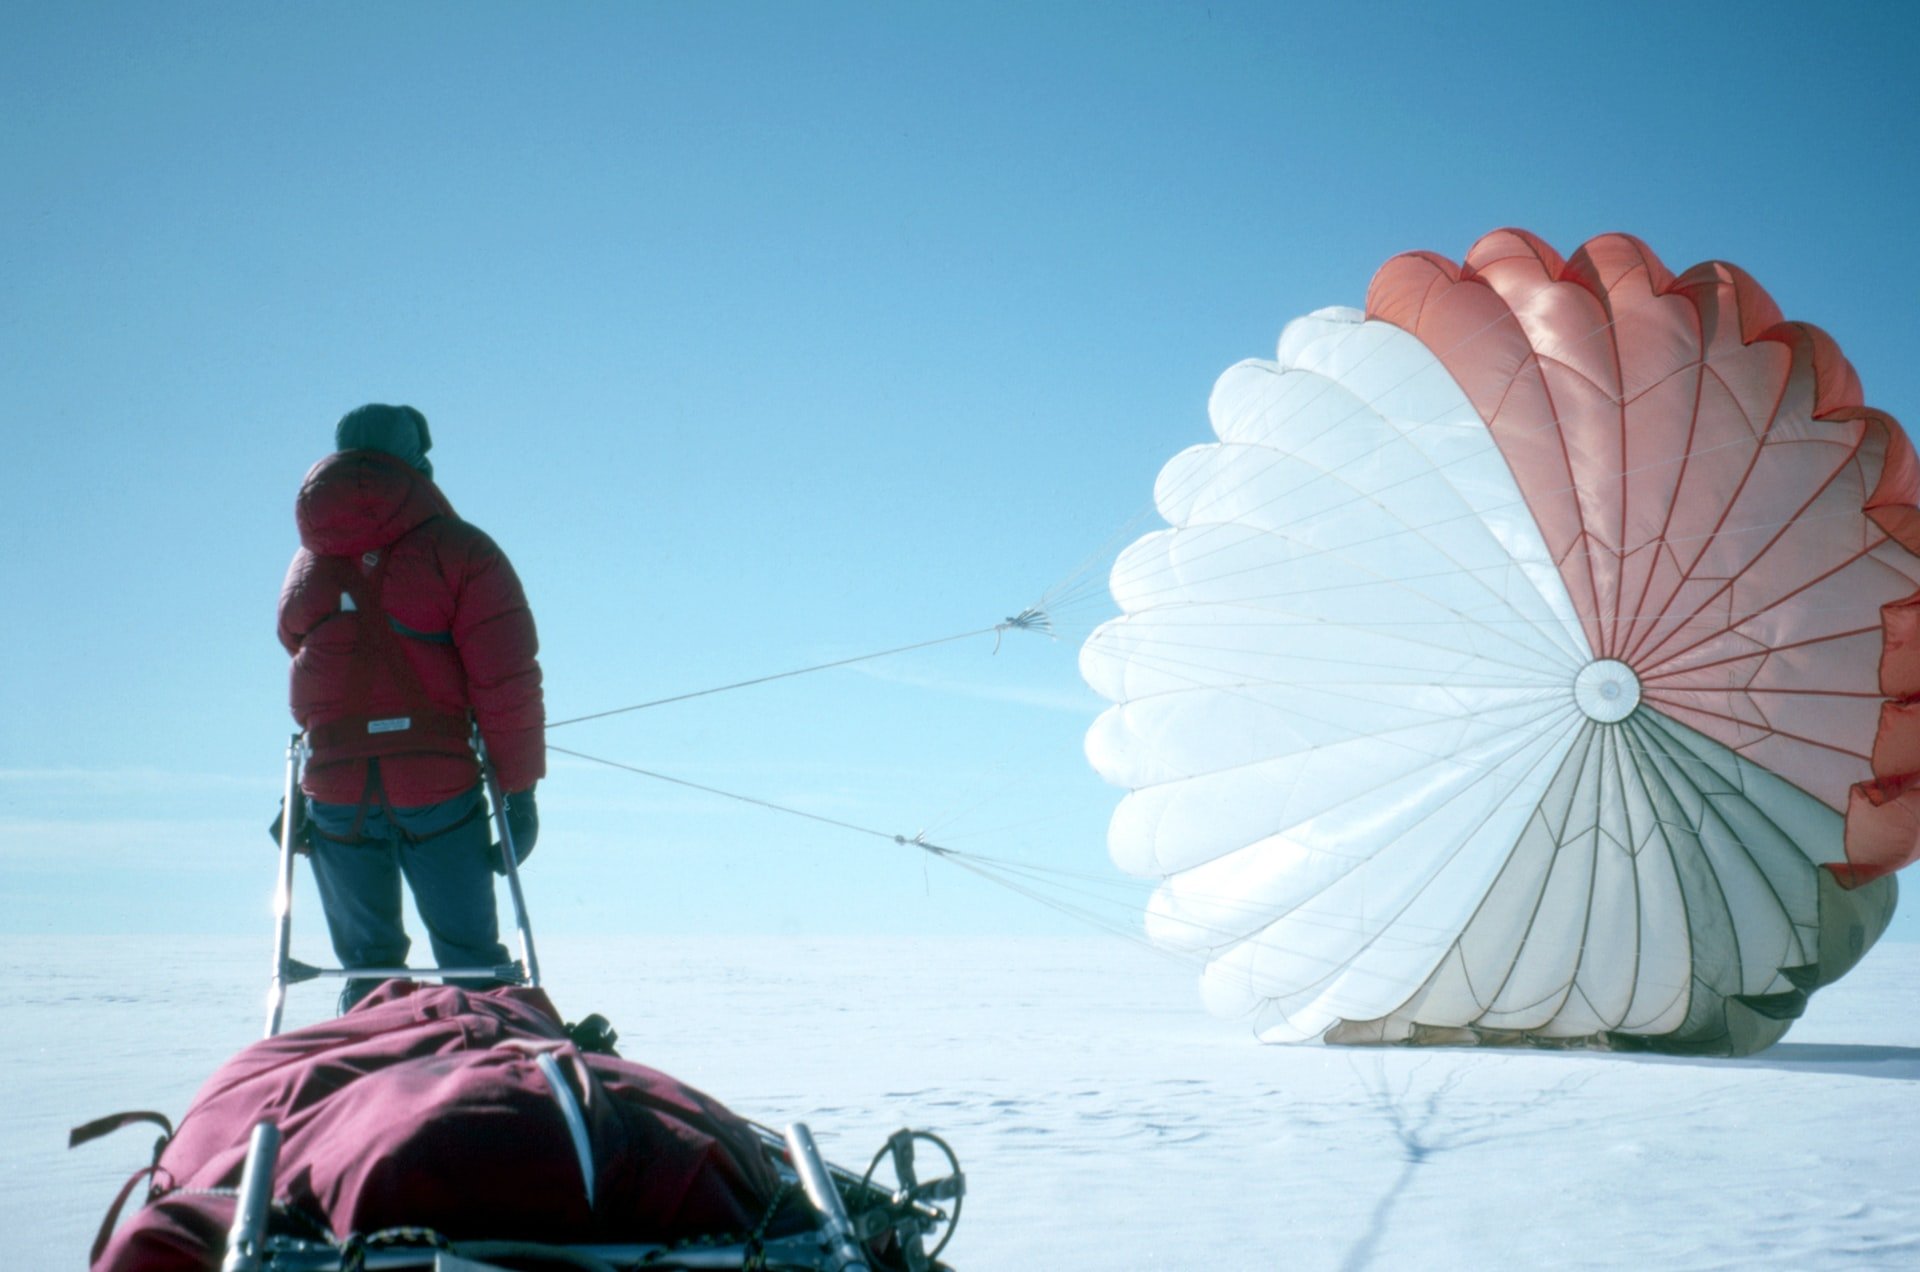 Person and parachite after landing in snow 